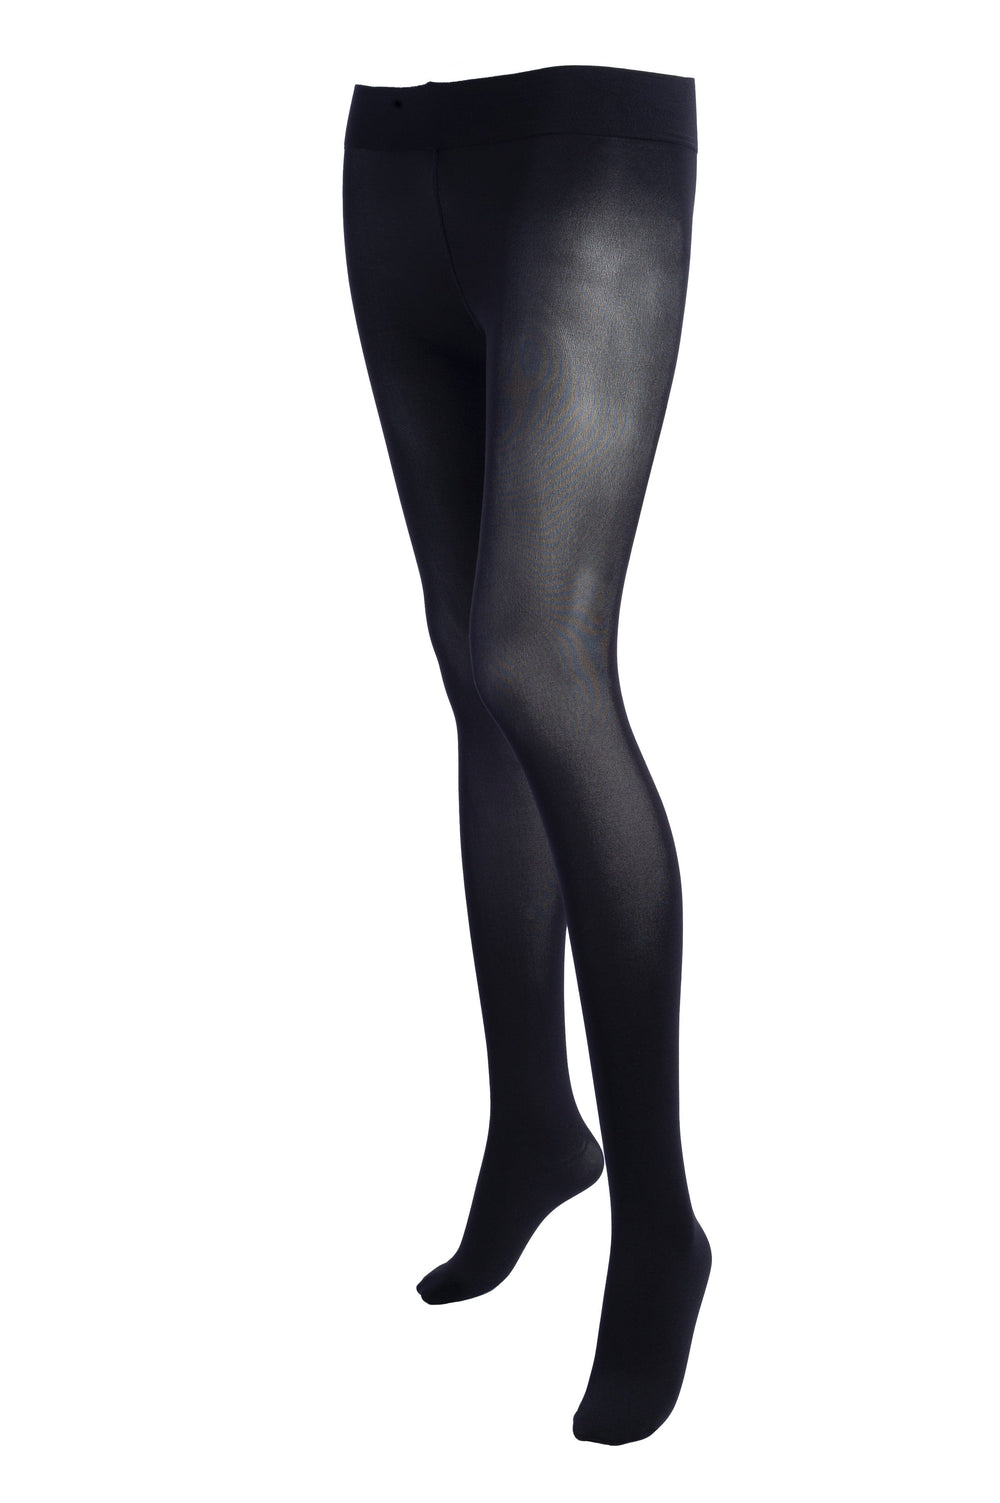 https://antidotestyle.com/cdn/shop/products/20211008-FW21-Wolford-VelvetDeLuxe66ComfortTights-001_1000x.jpg?v=1689693976